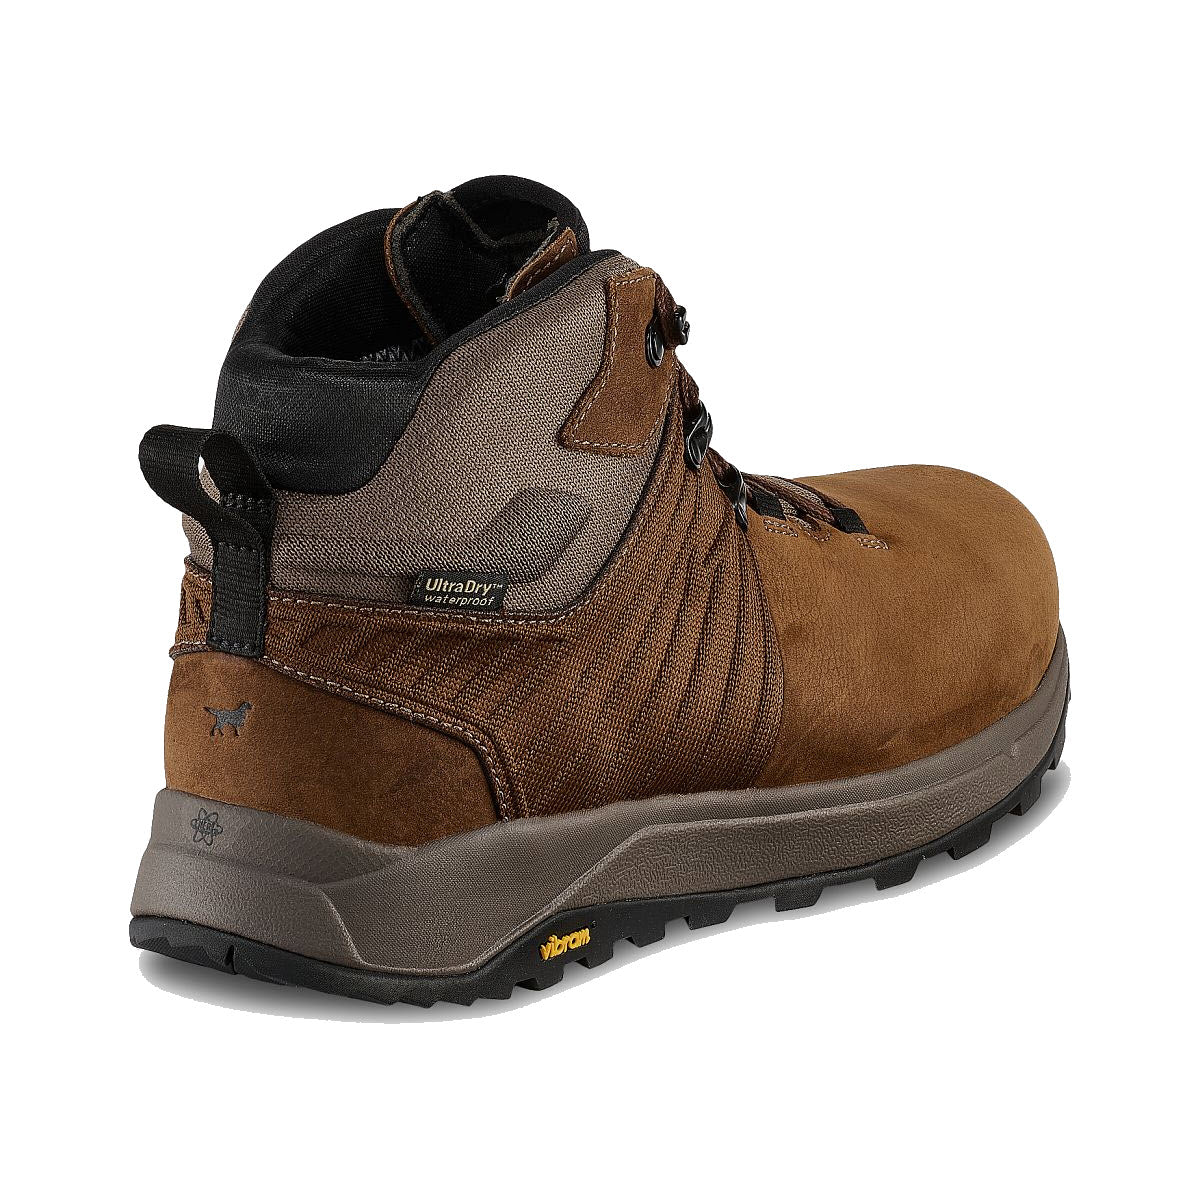 A single IRISH SETTER CASCADE 5 INCH SAFETY TOE BOOT BROWN - MENS with a black Vibram® Bayu sole, labeled &quot;ultradry&quot; and featuring a small logo of a moose on the side.